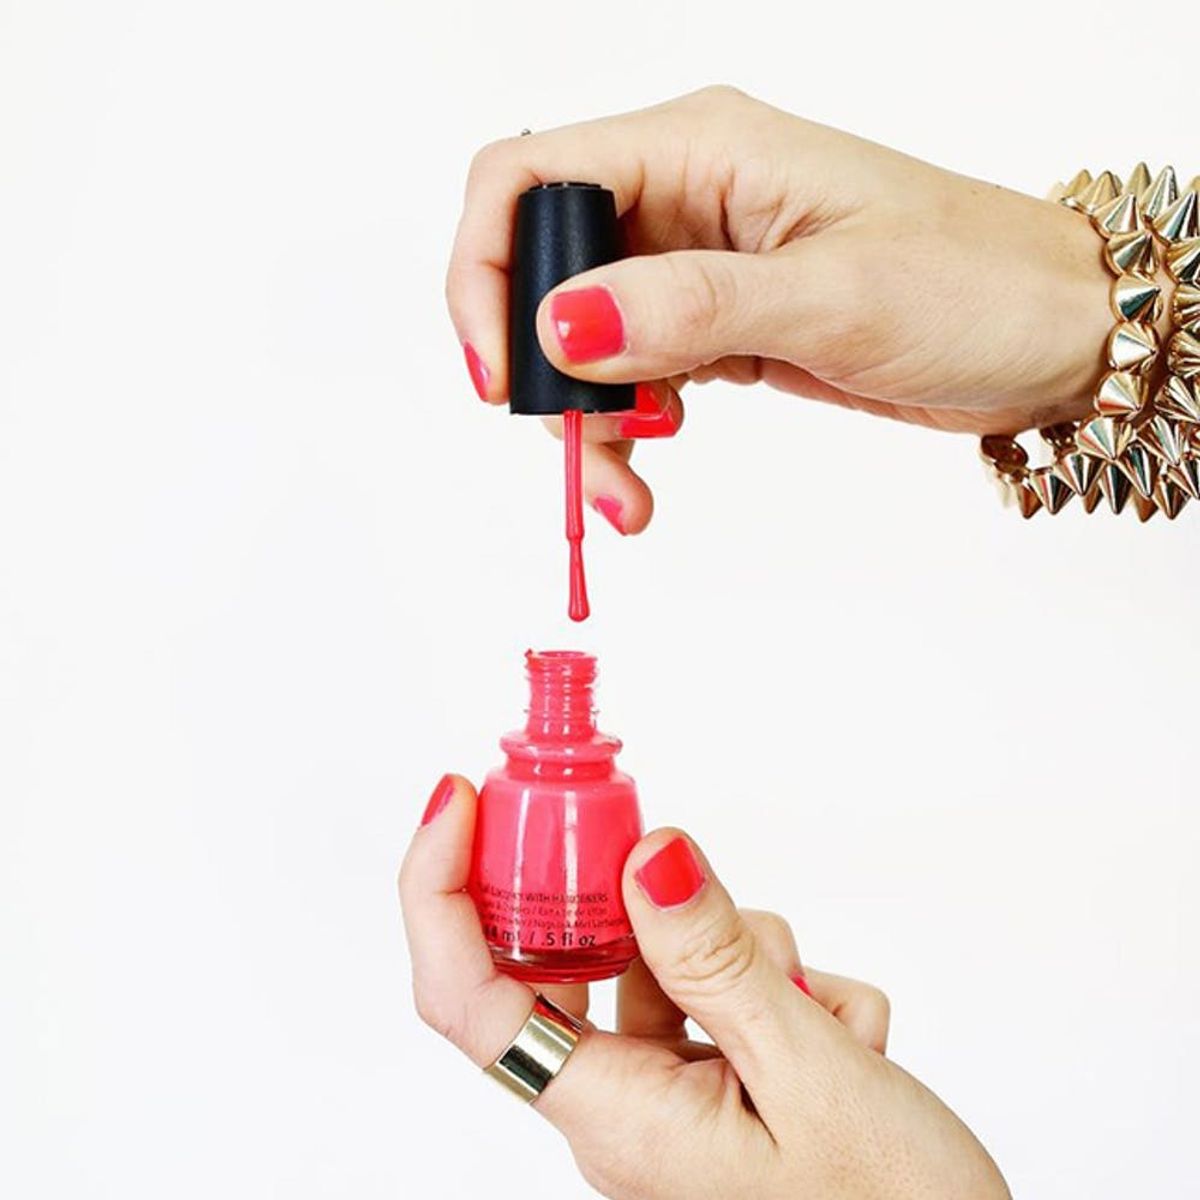 24 5-Free Nail Polishes to Detox Your Beauty Routine